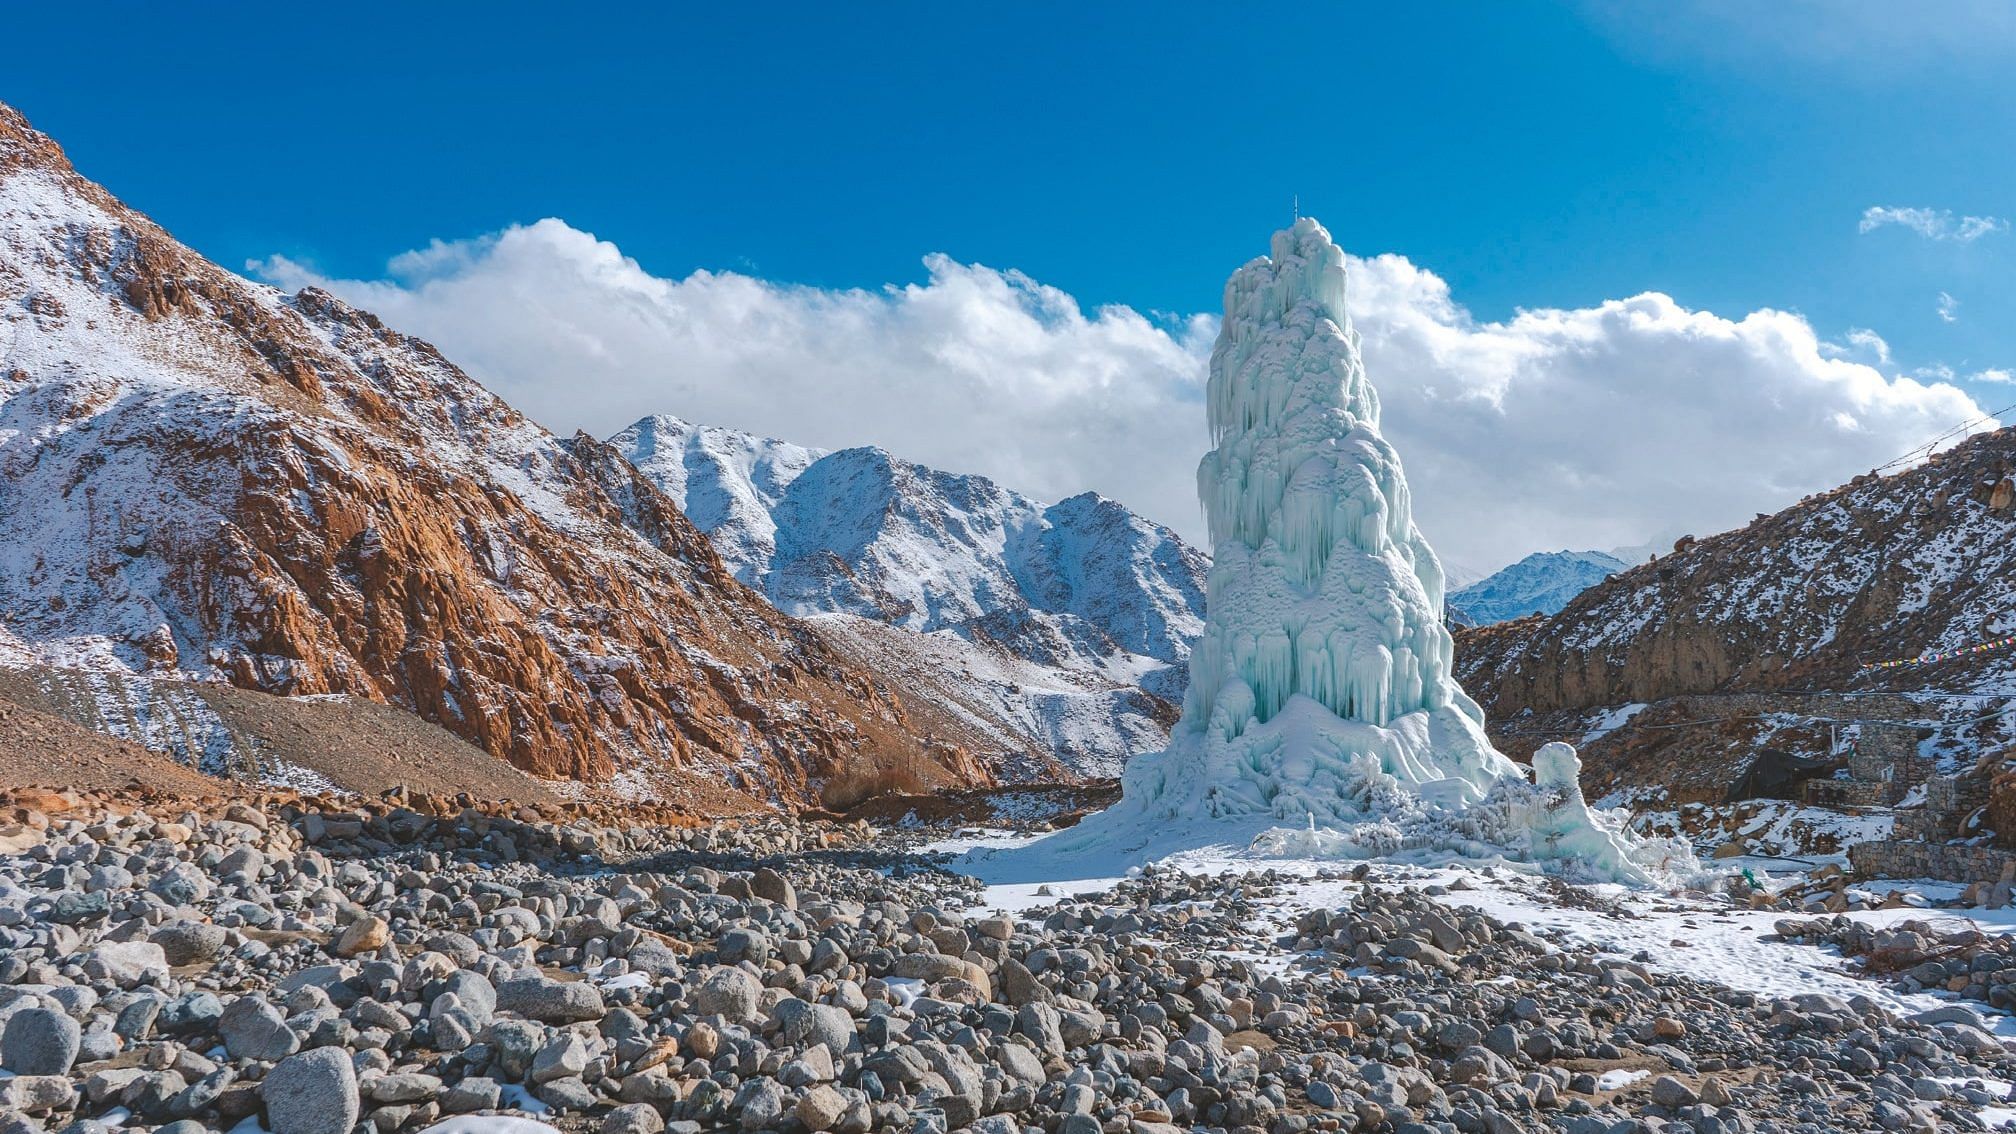 Ladakh is future-proofing against climate change with ice stupas-less snow, melting glaciers